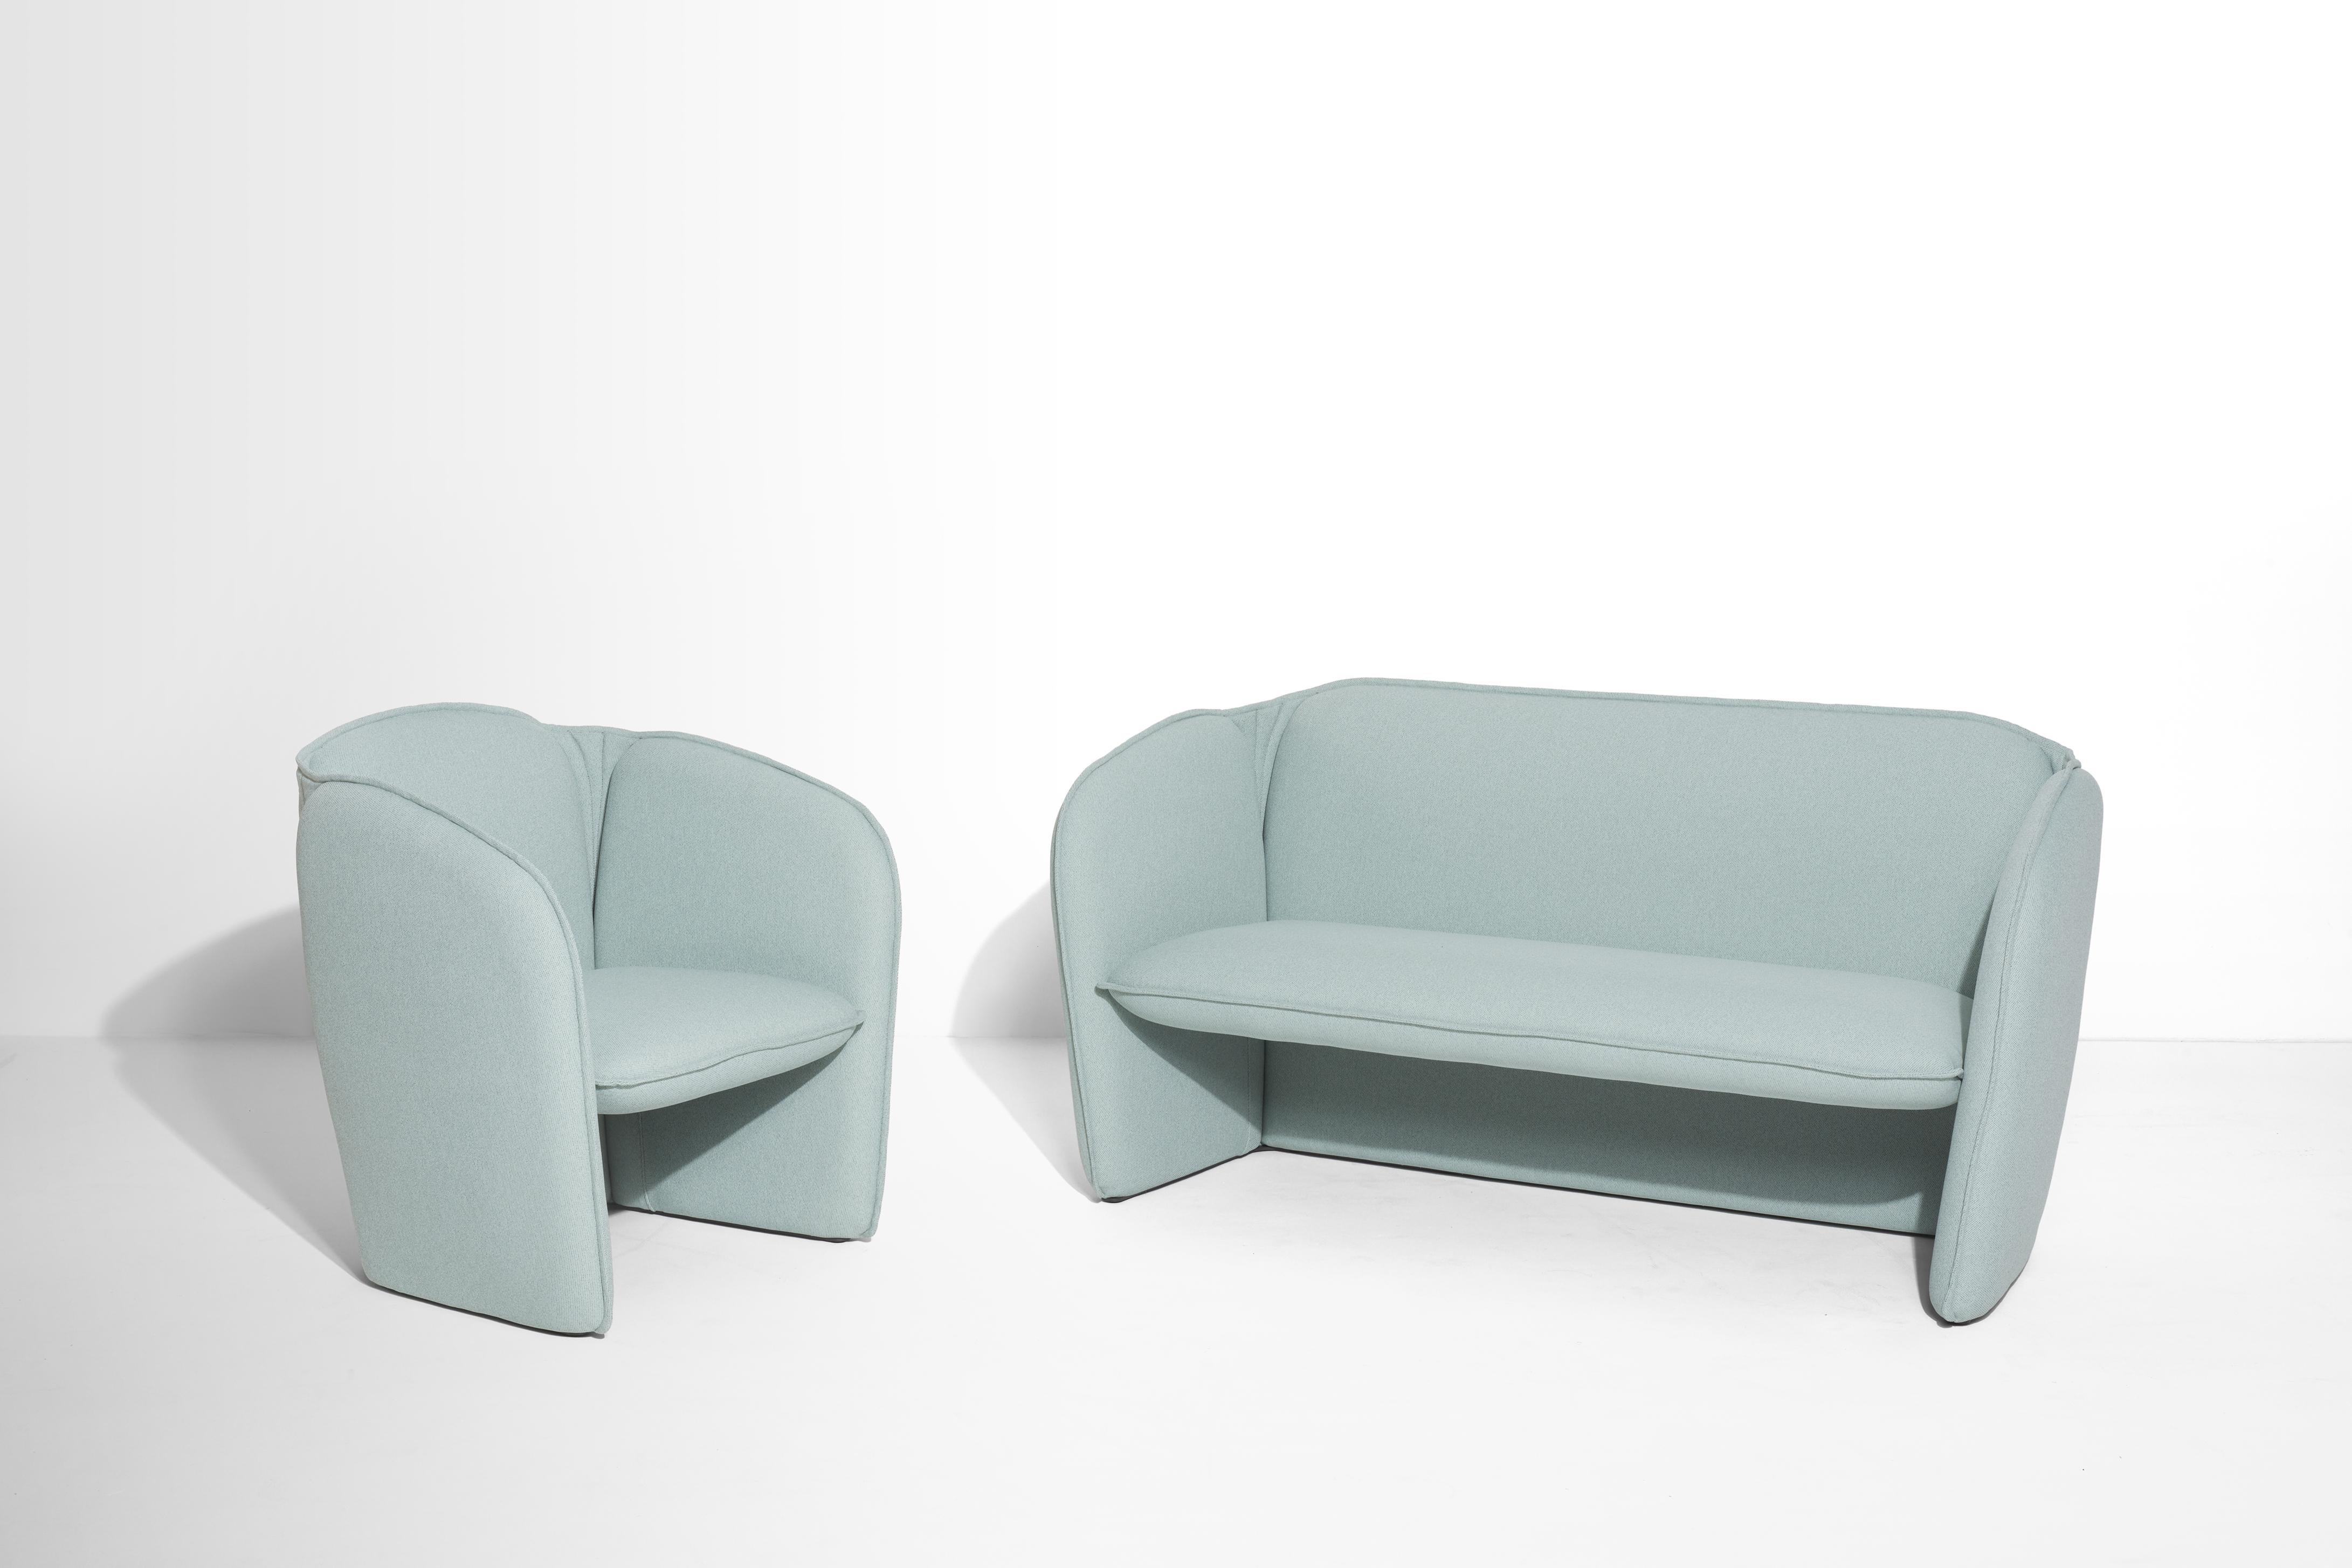 Petite Friture Lily Sofa in Light Blue by Färg & Blanche, 2022 For Sale 5